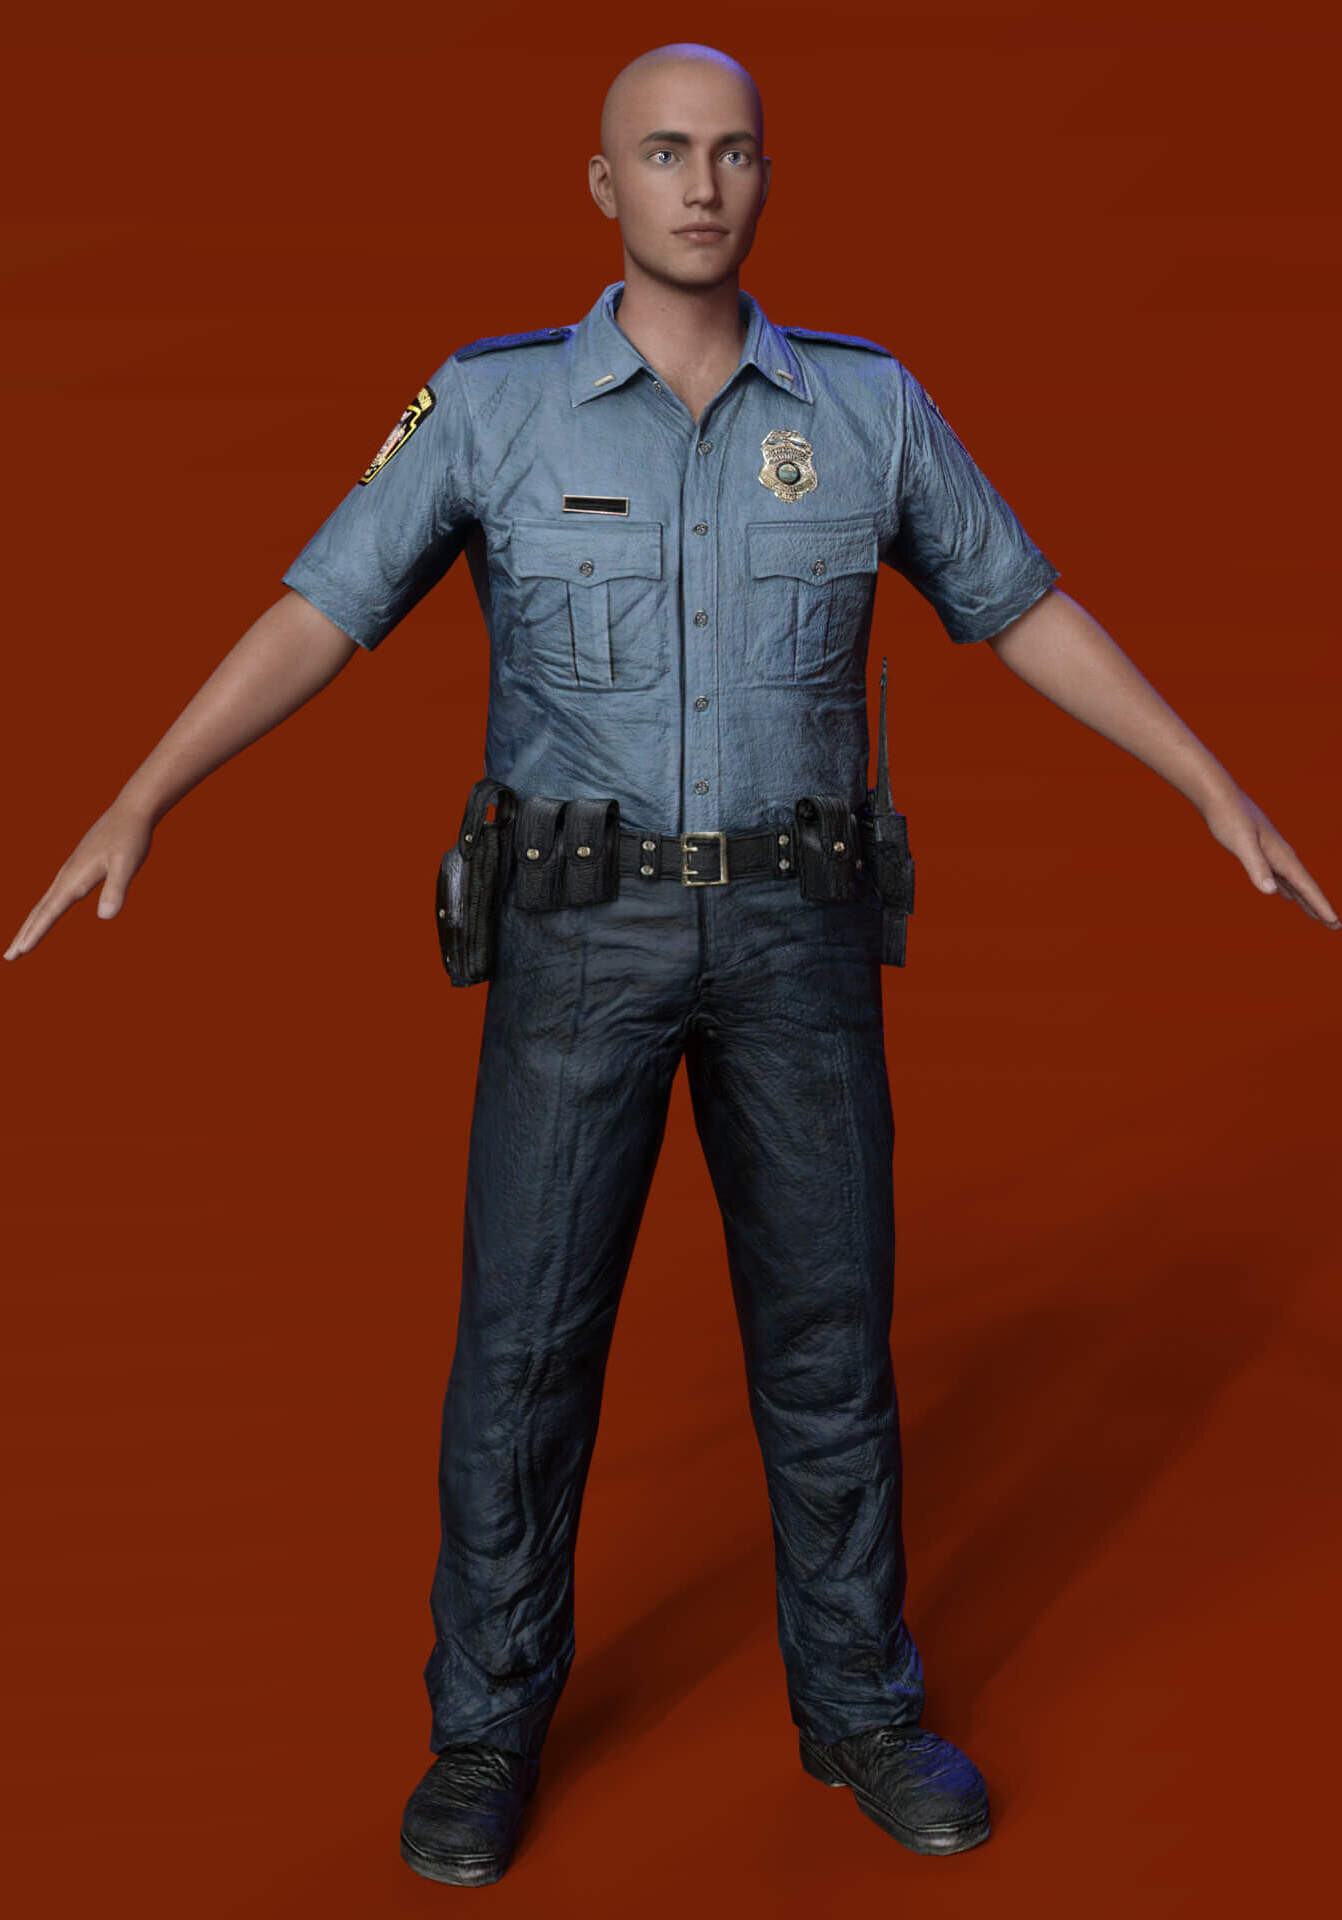 https://simp6.host.church/images3/lyko3d-generic-prison-guard-outfit-for-g8m-01ab9b46355ed000a9.jpg